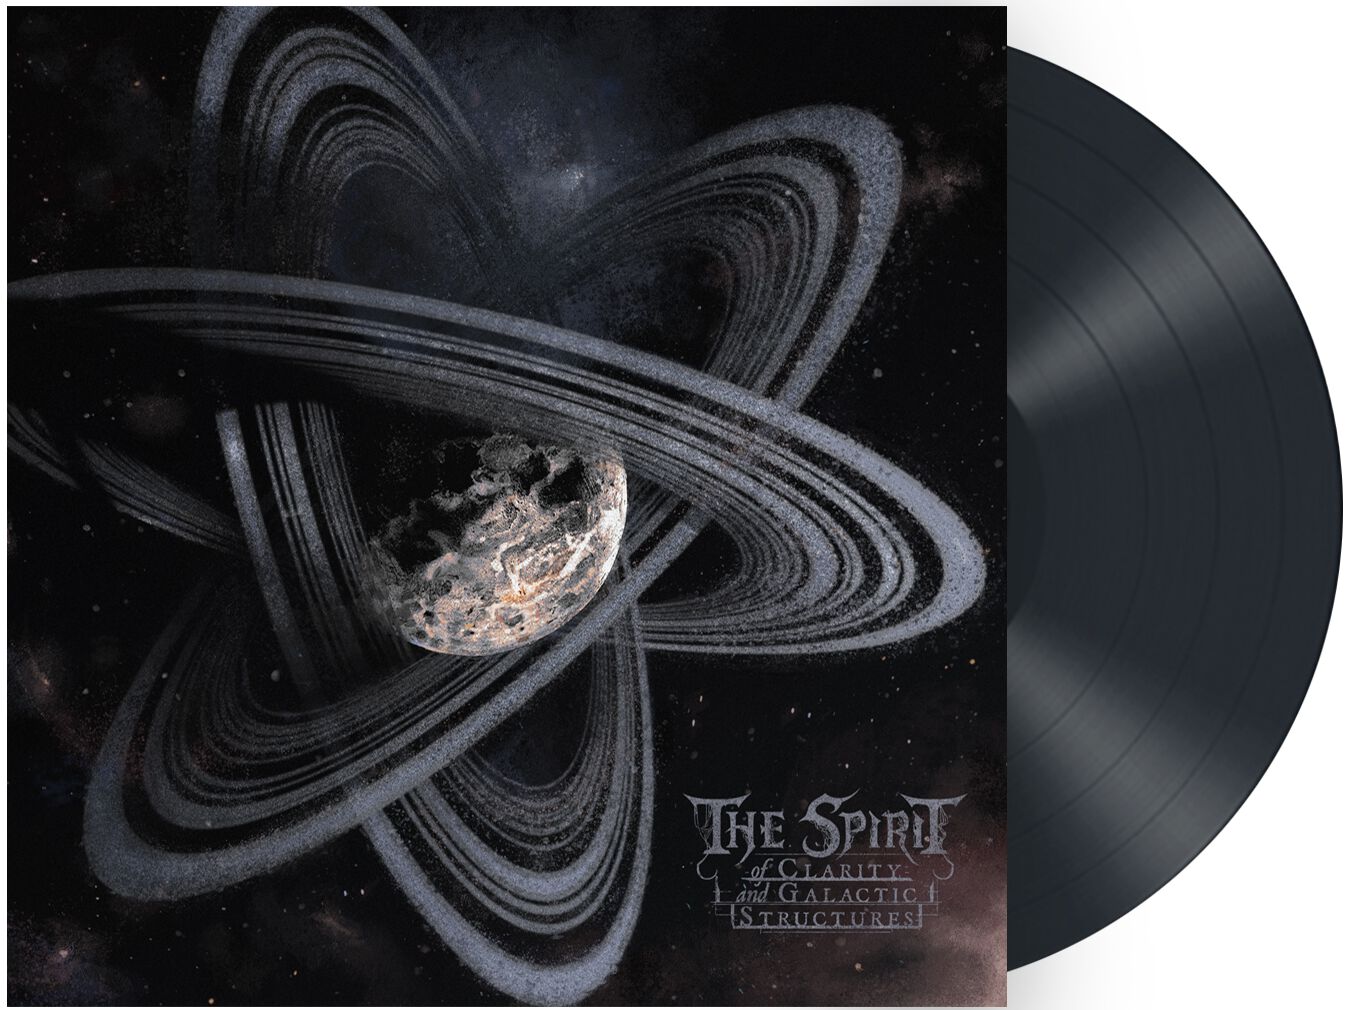 Image of The Spirit Of Clarity and galactic structures LP schwarz